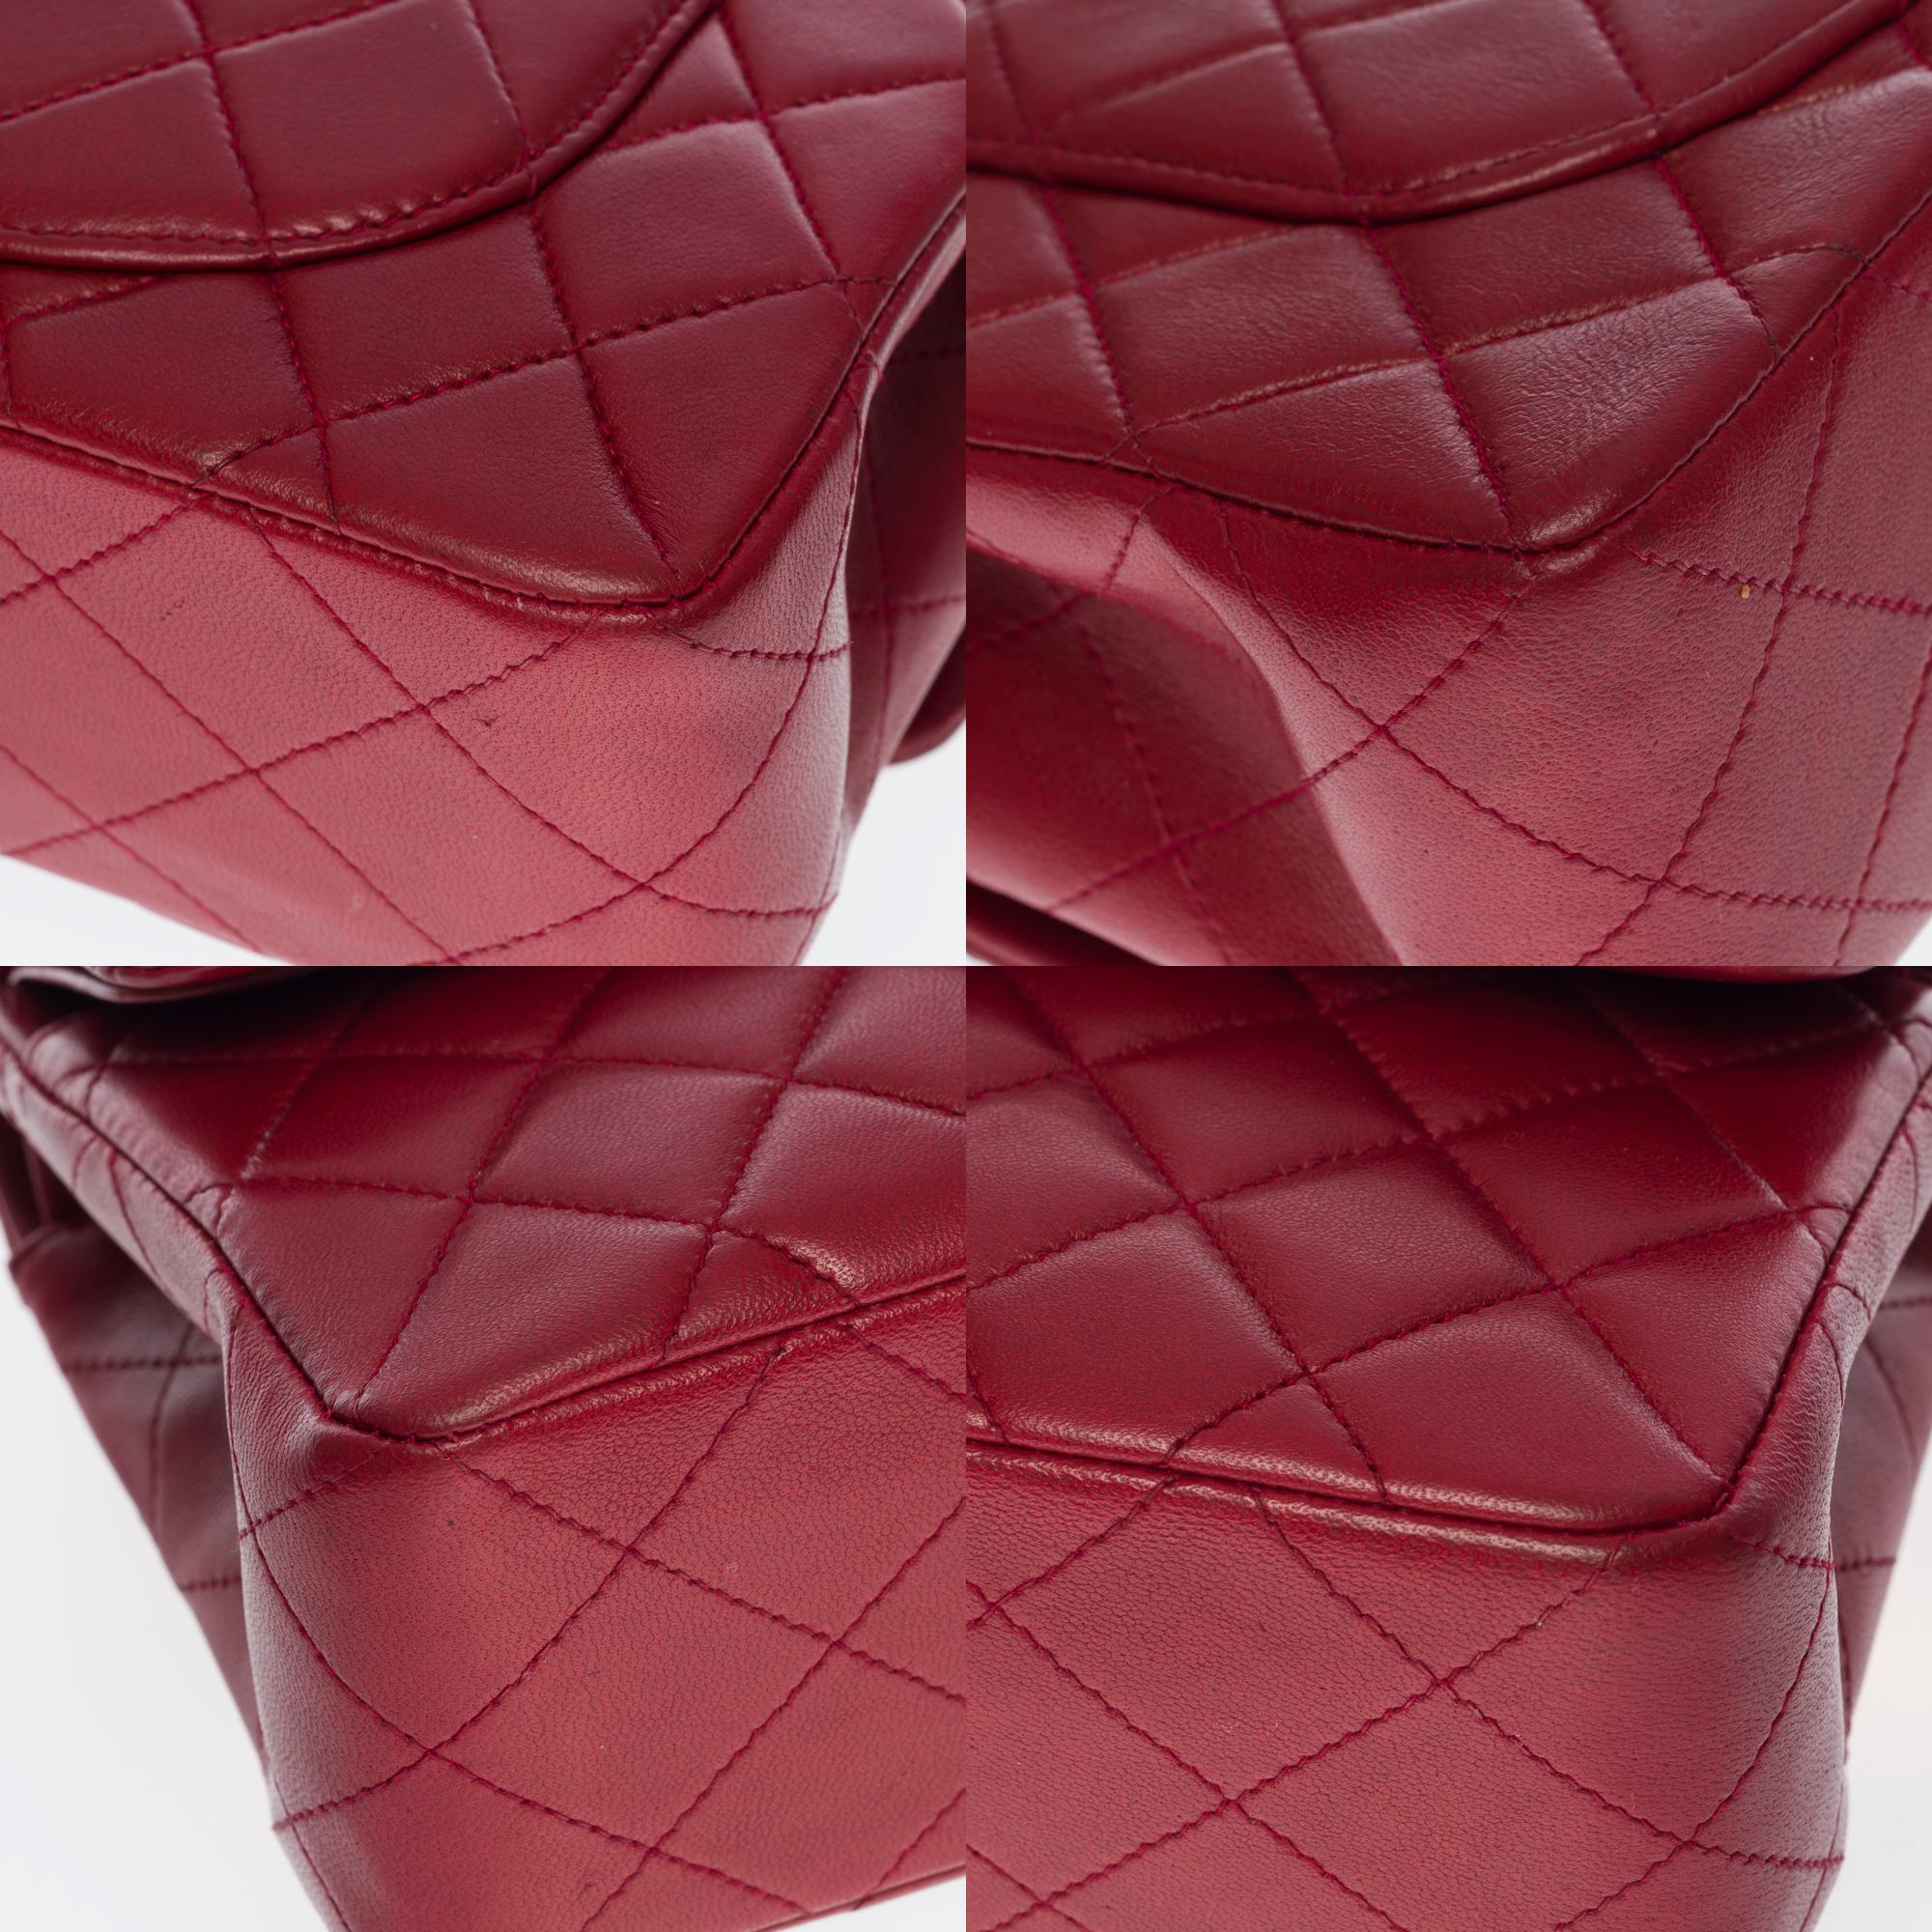 Chanel Timeless 23cm double flap Shoulder bag in red quilted lambskin, GHW 5